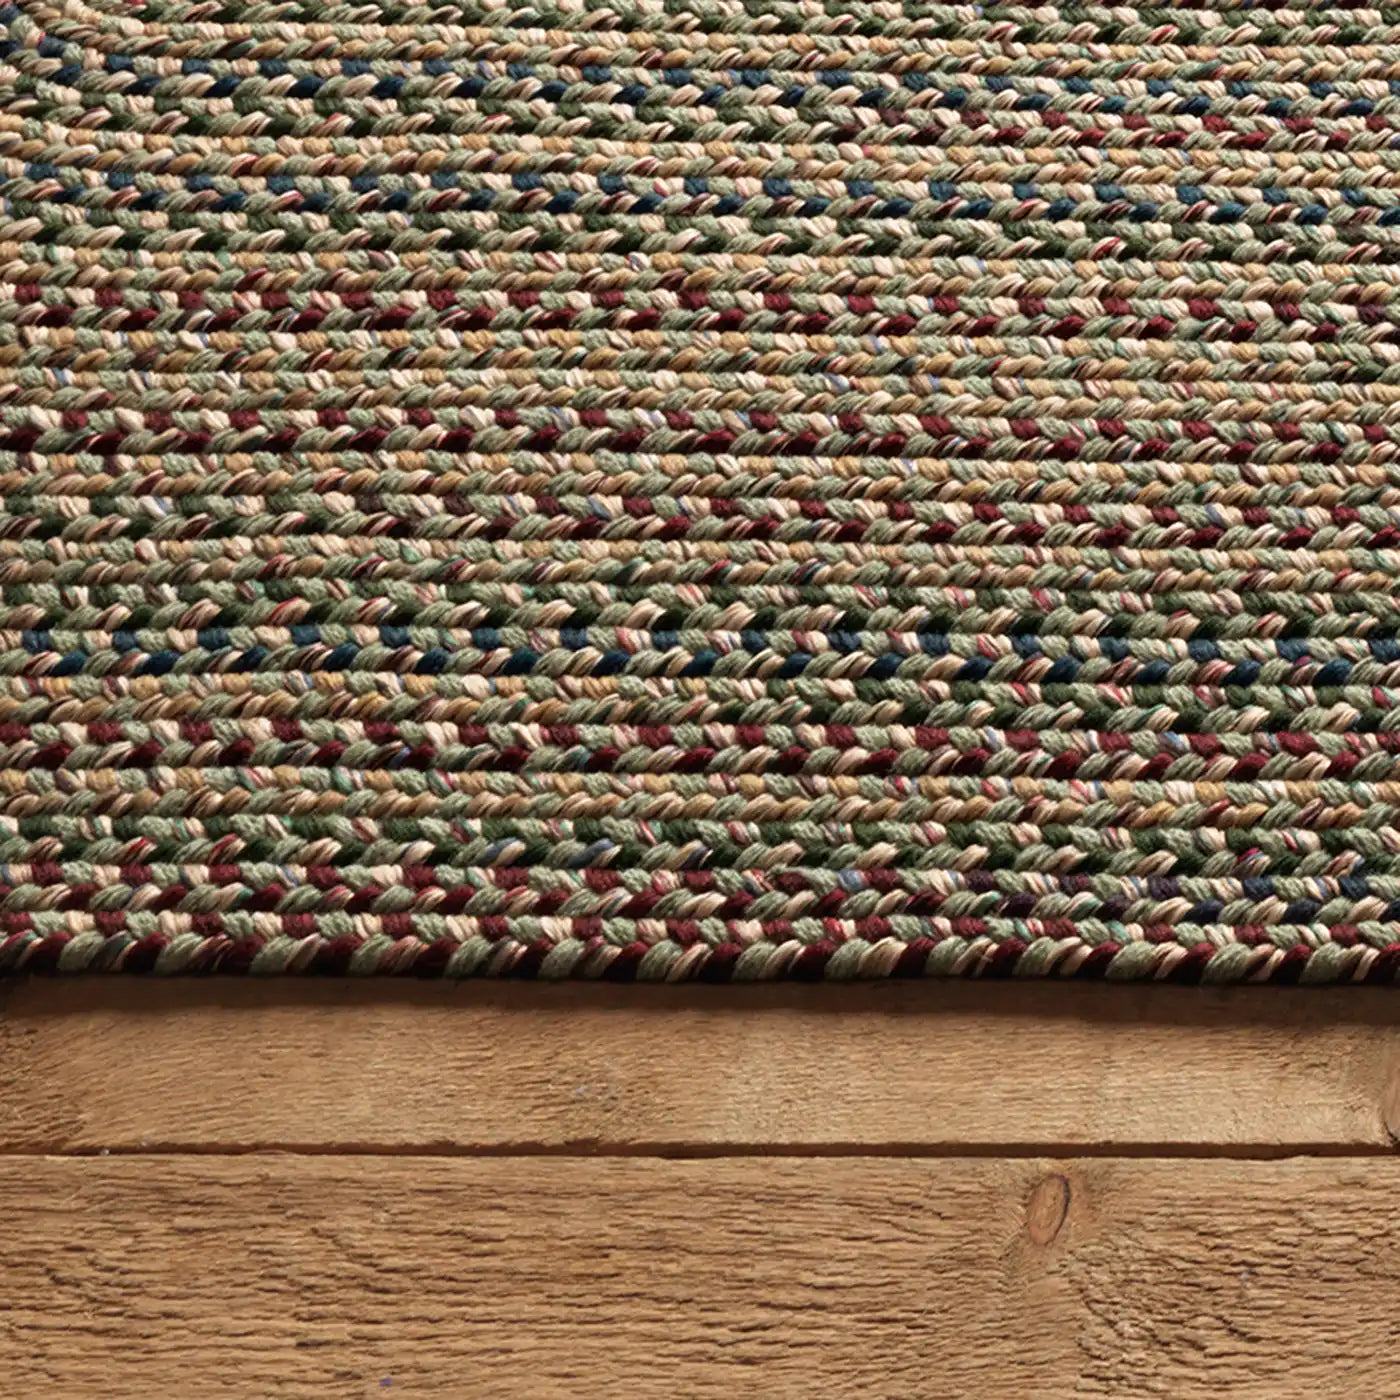 Colonial Mills Worley Gray Handcraft Braided Runner Rug in Braided & Farmhouse/Rustic style.